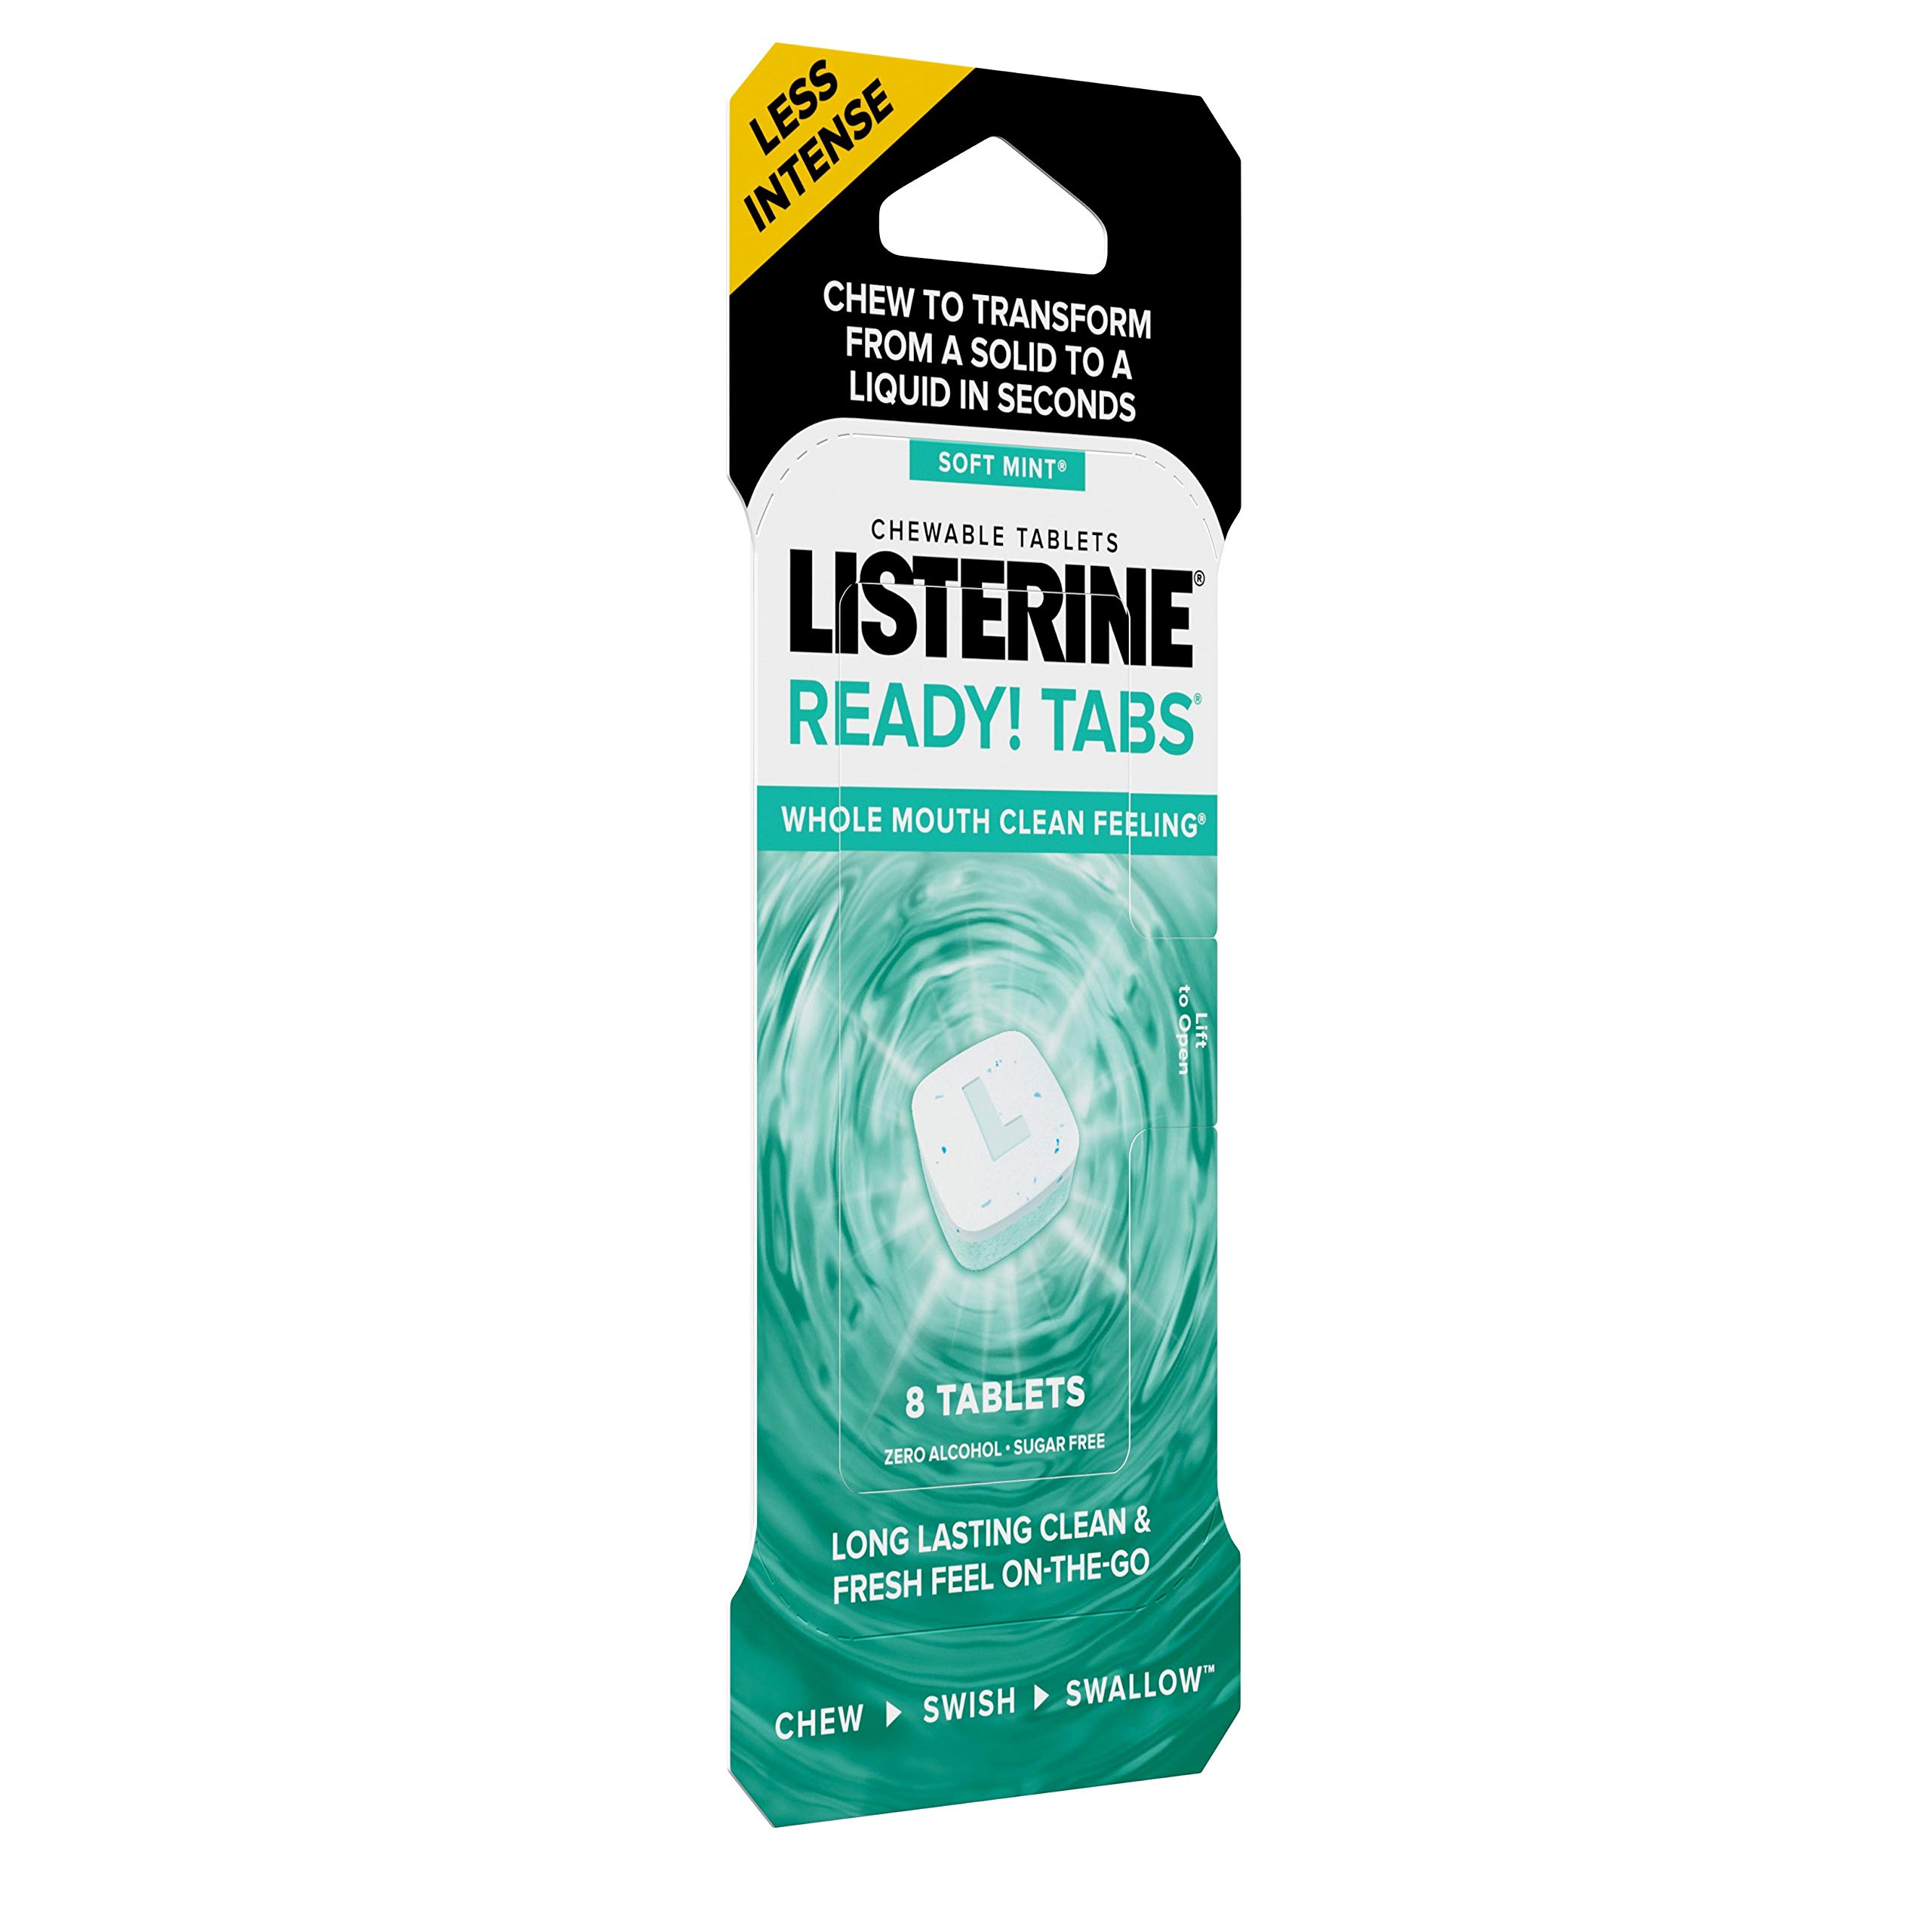 Listerine Ready! Tabs Chewable Tablets with Soft Mint Flavor, Revolutionary 4-Hour Fresh Breath Tablets to Help Fight Bad Breath On-the-Go, Sugar-Free, Alcohol-Free & Gluten-Free, 8 ct